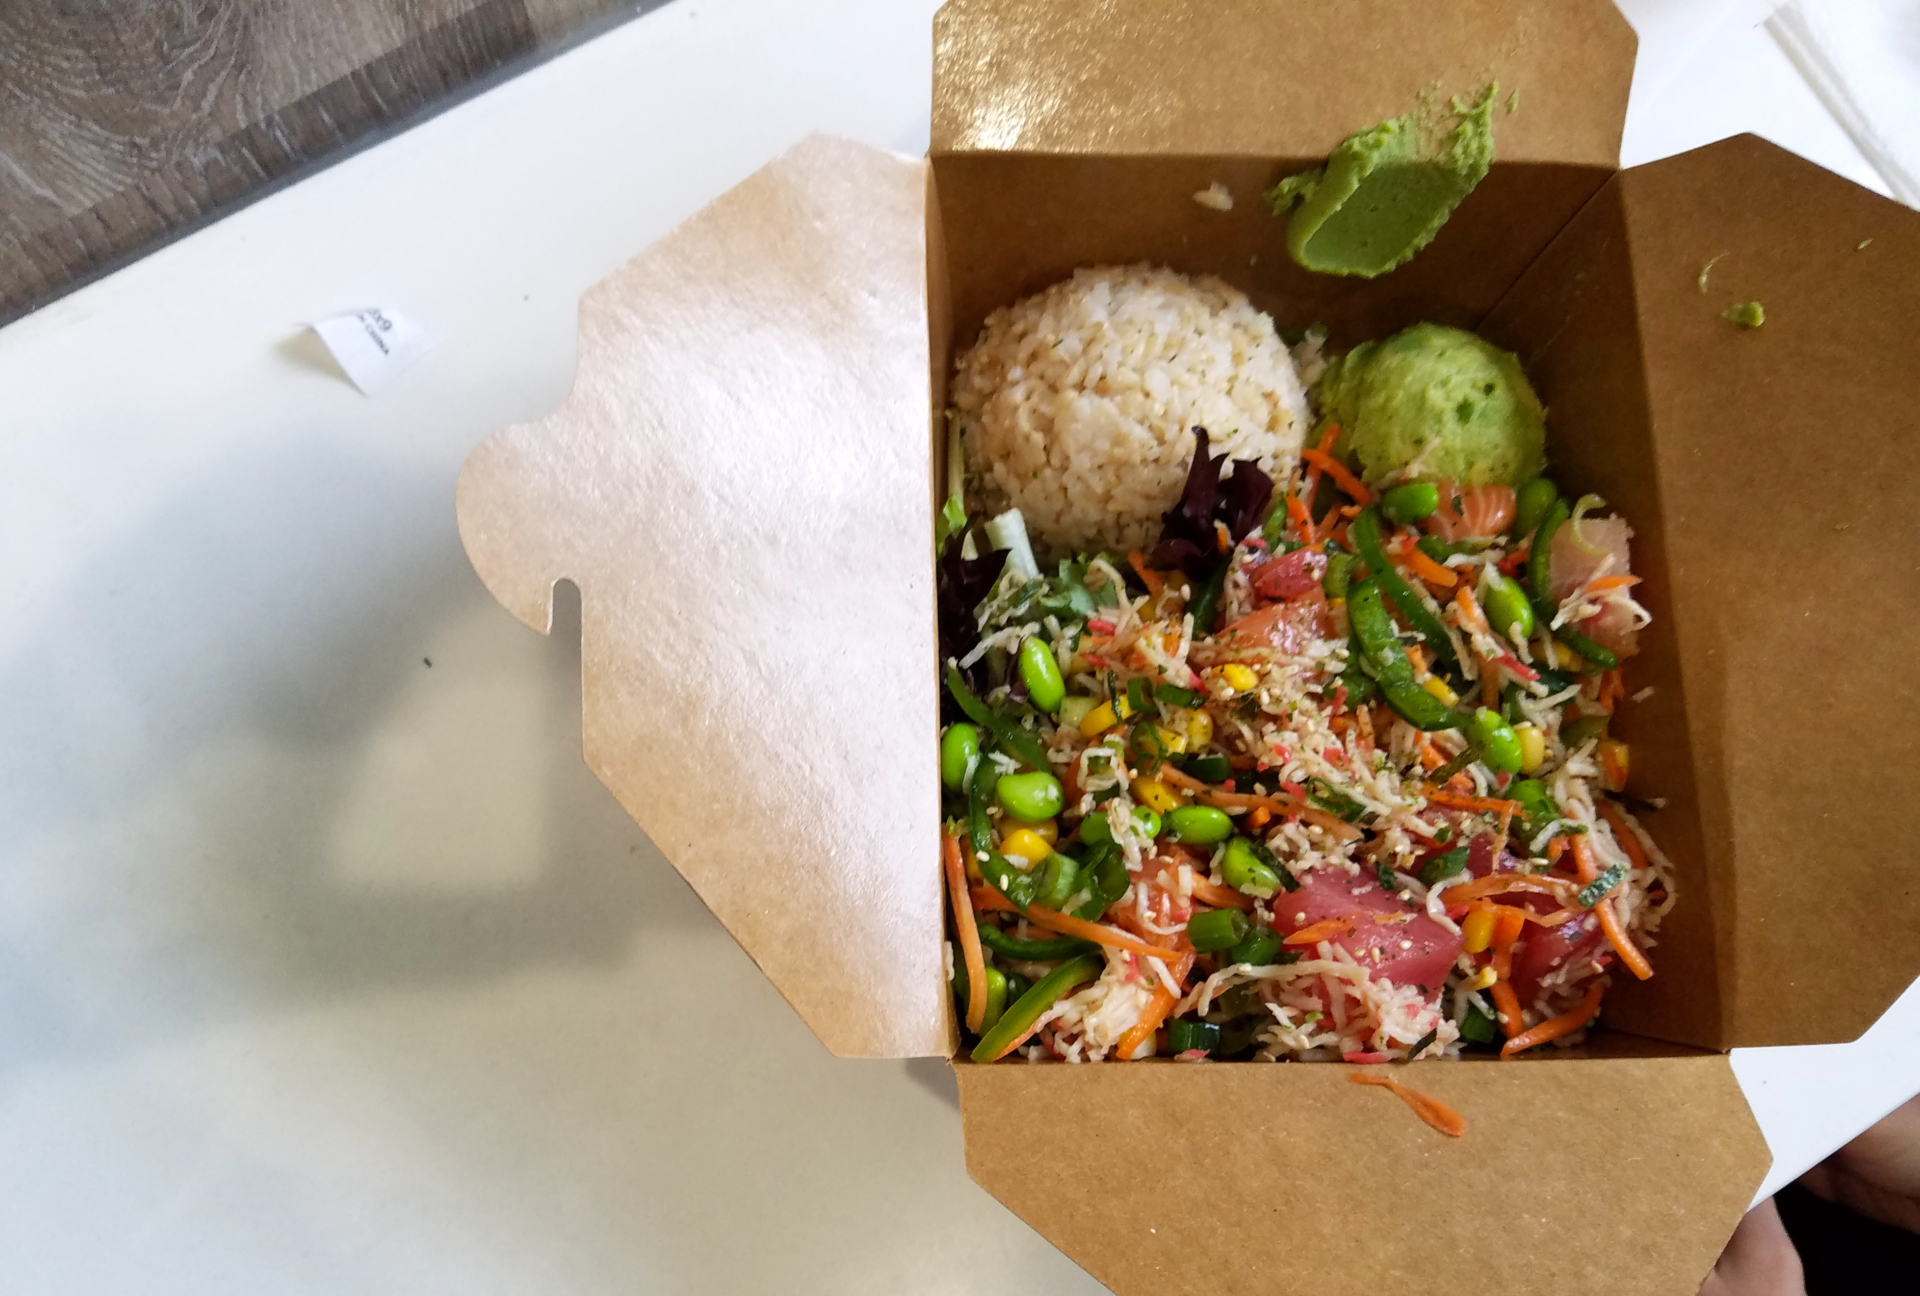 A make-your-own bowl at Our Poke Place.